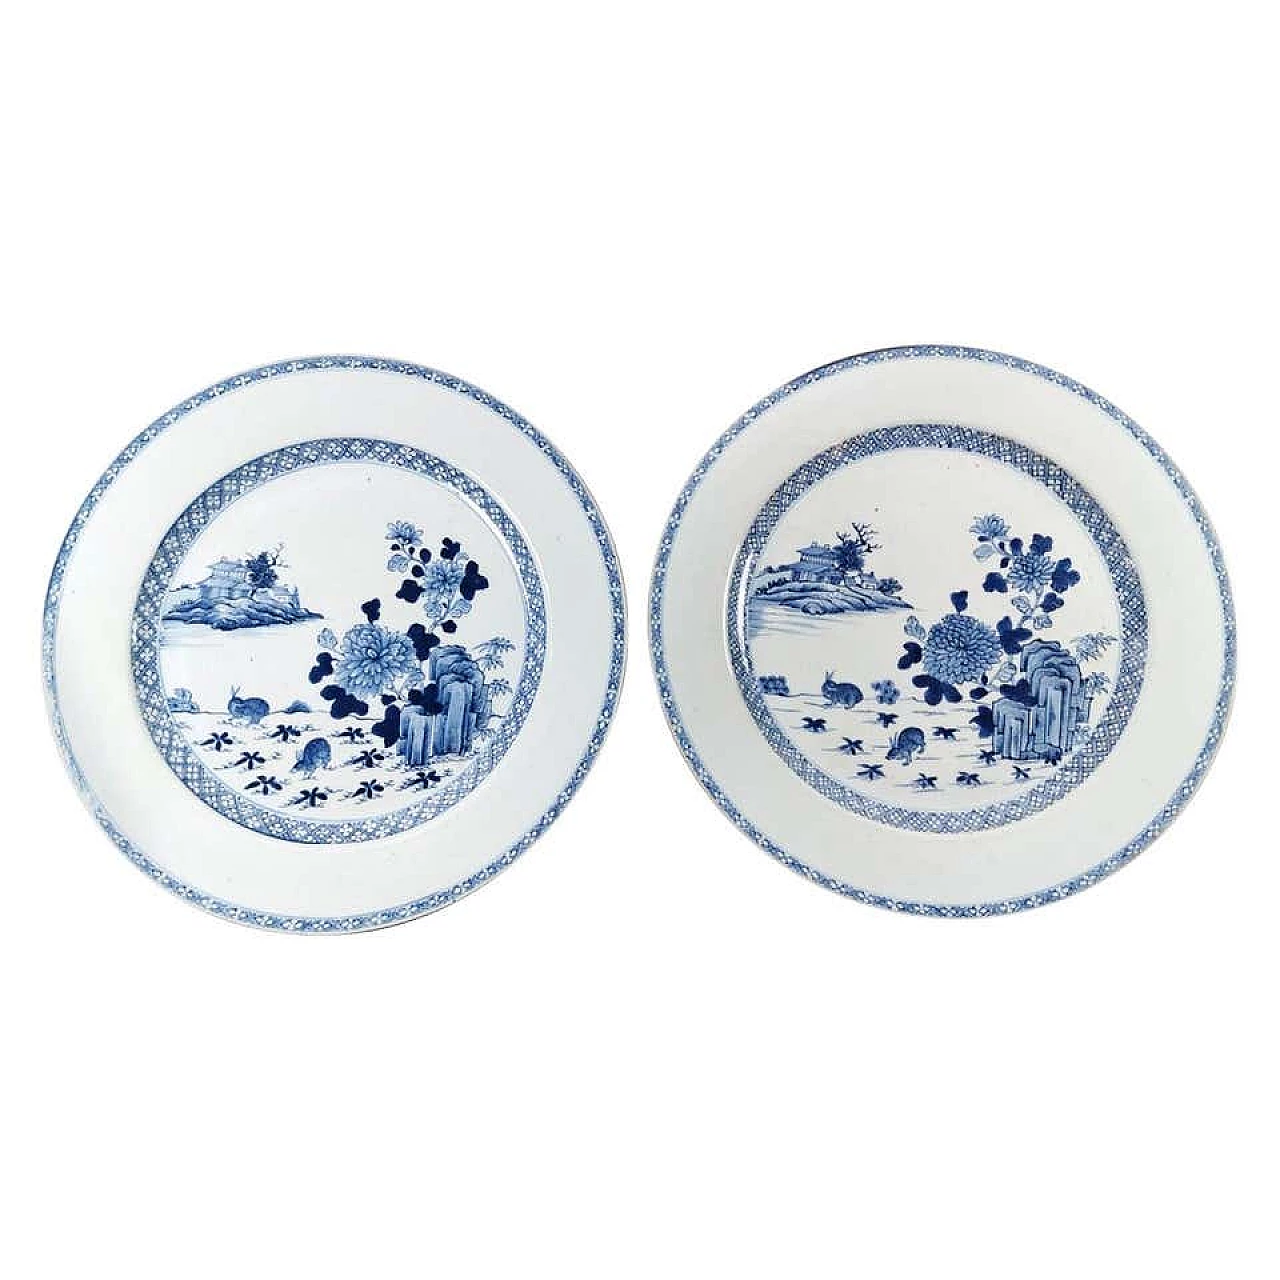 Pair of hand painted Qing dynasty chinese porcelain trays or plates in cobalt blue, 18th century 1186562